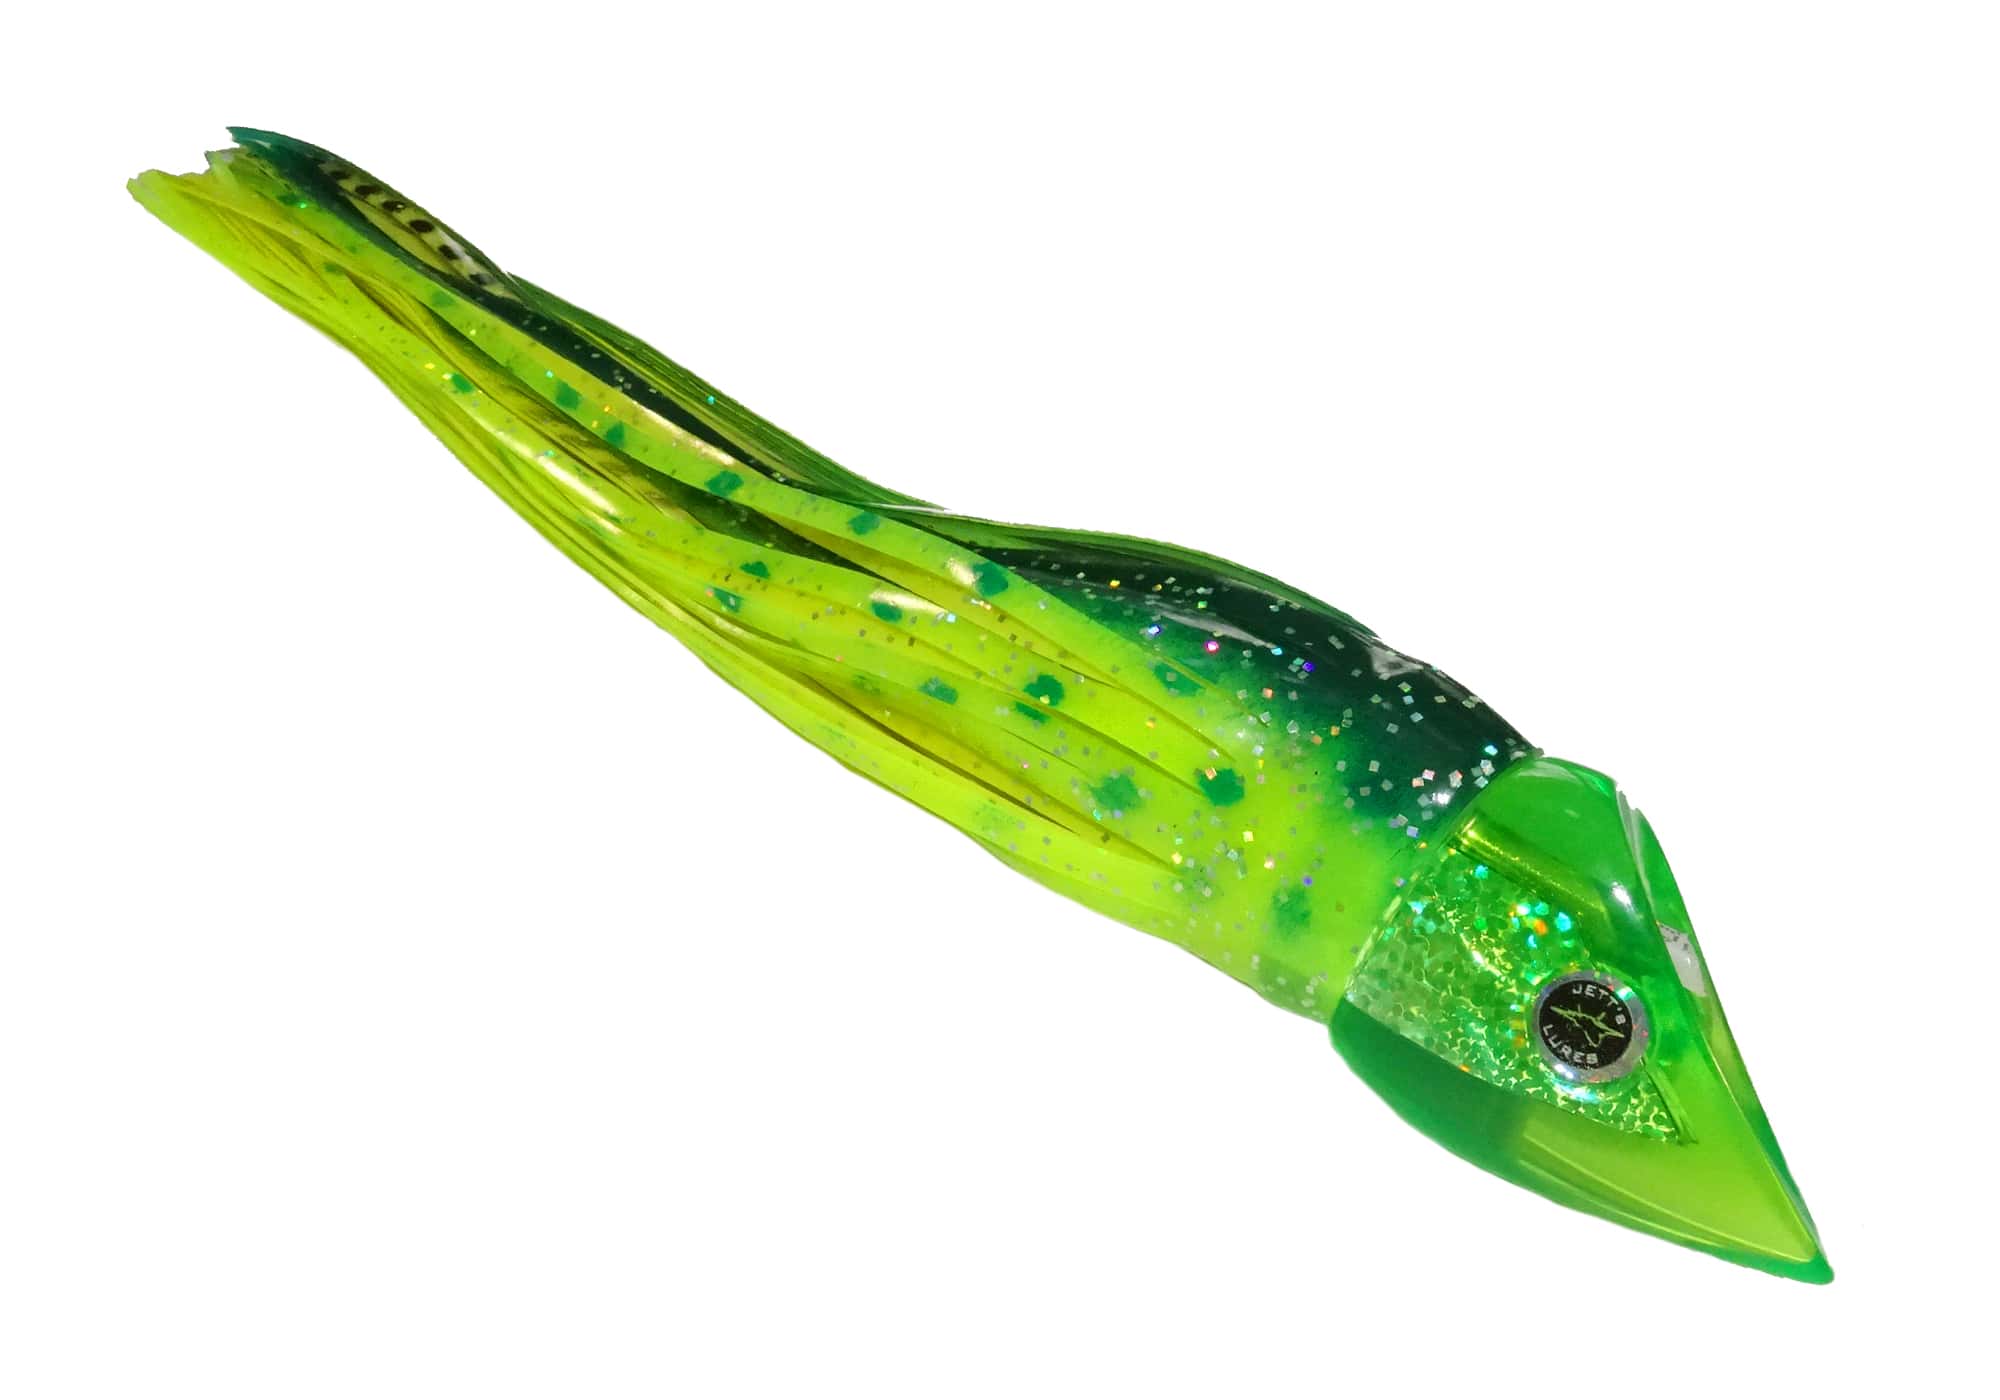 Jetts Lures - Wedgie Lure - Superior Tuna Lure